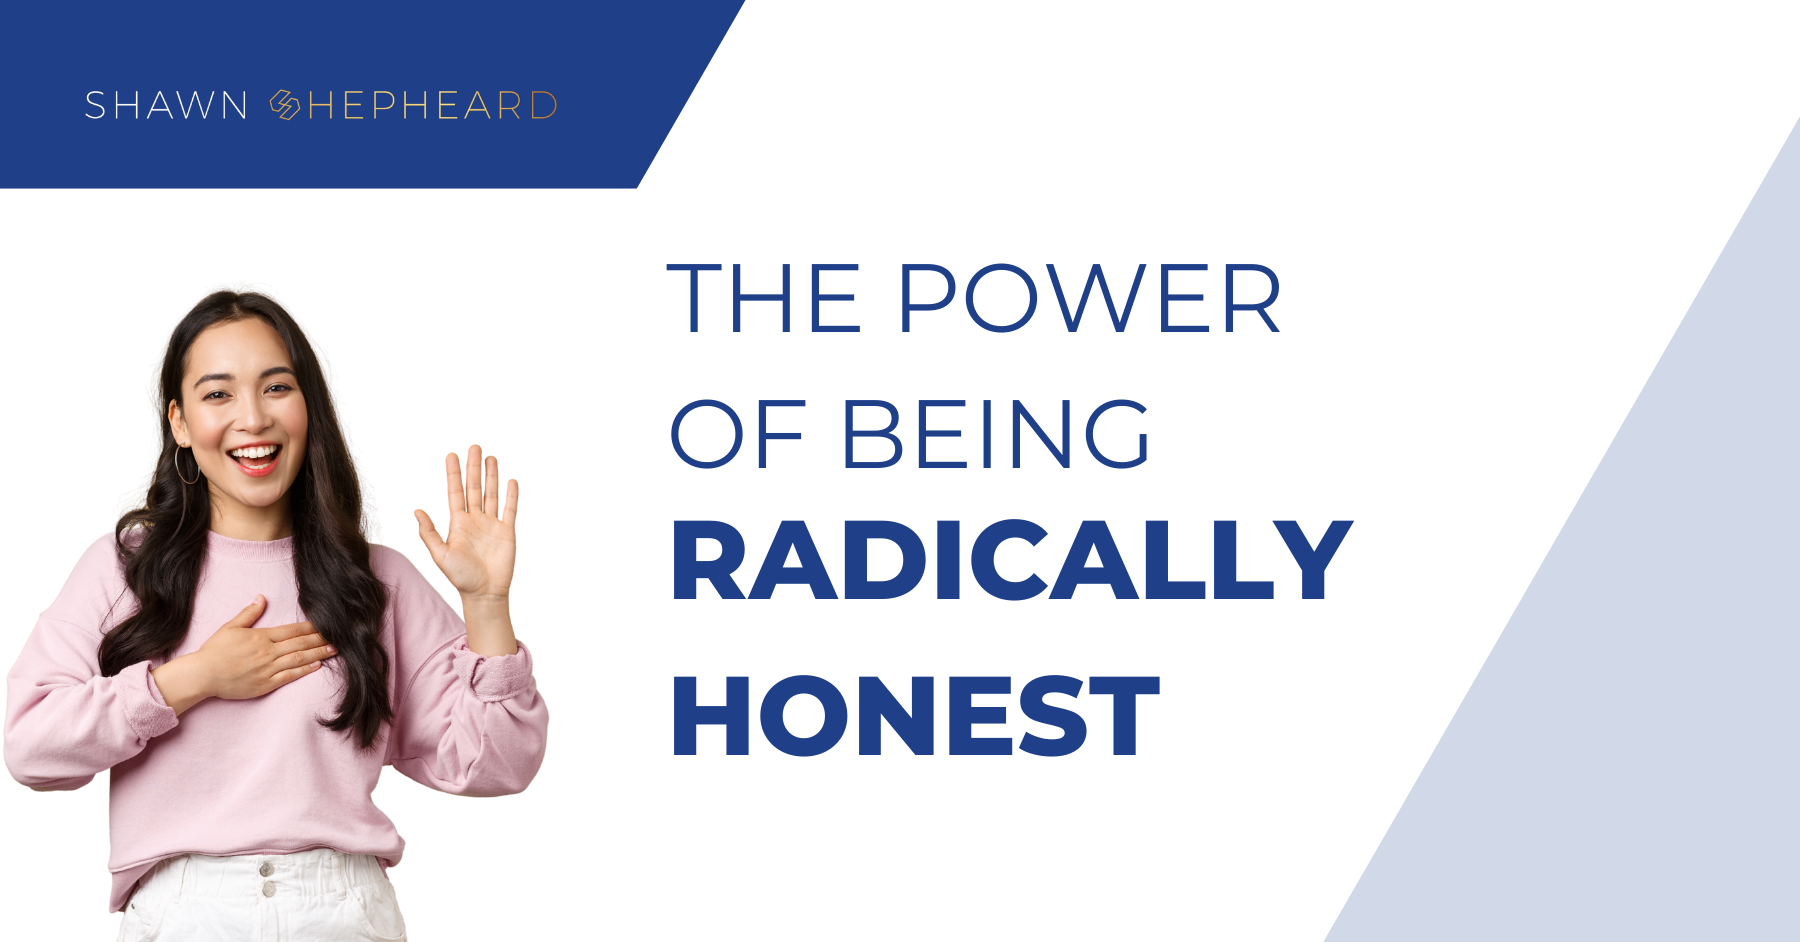 The Power of Being Radically Honest